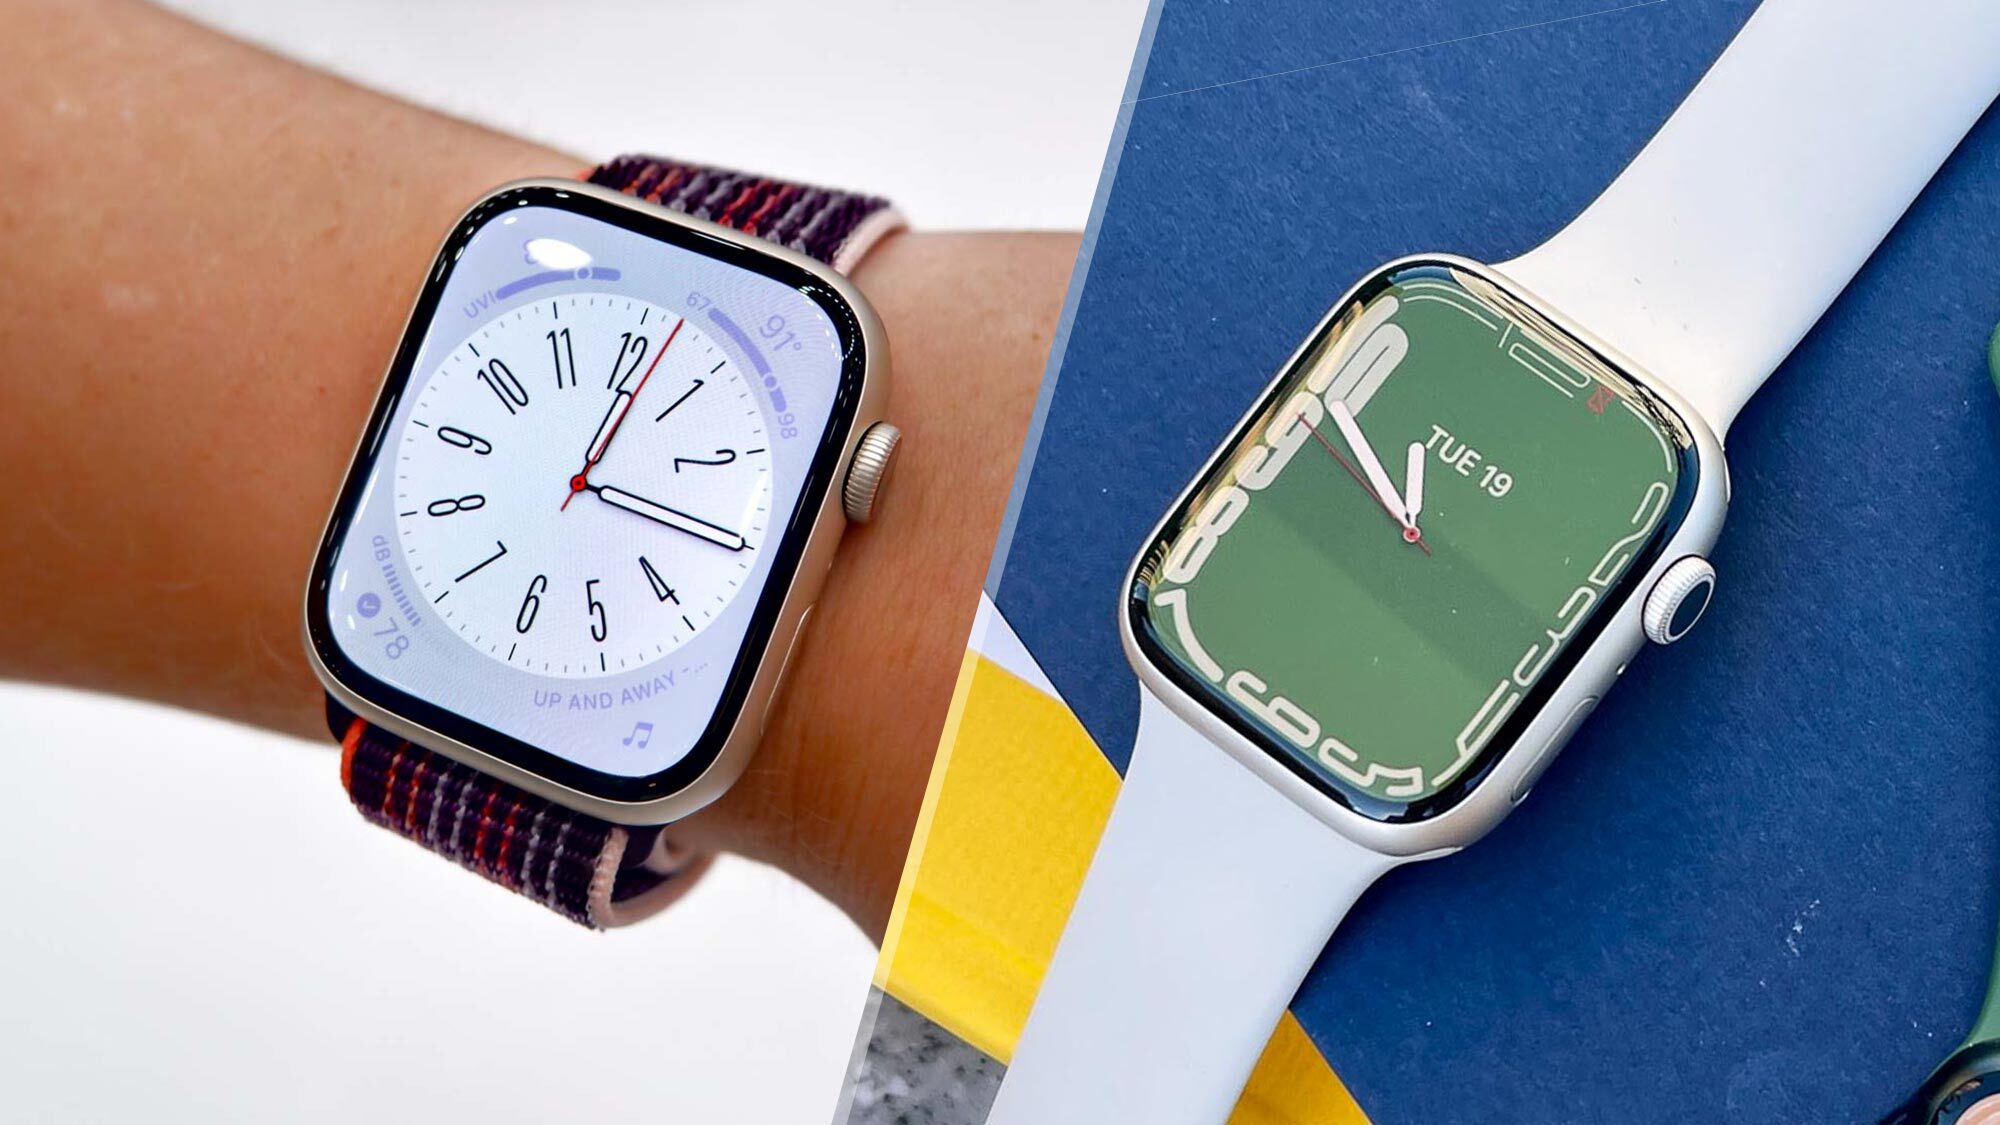 Apple Watch Series 8 vs. Series 7: A Quick Look at Their